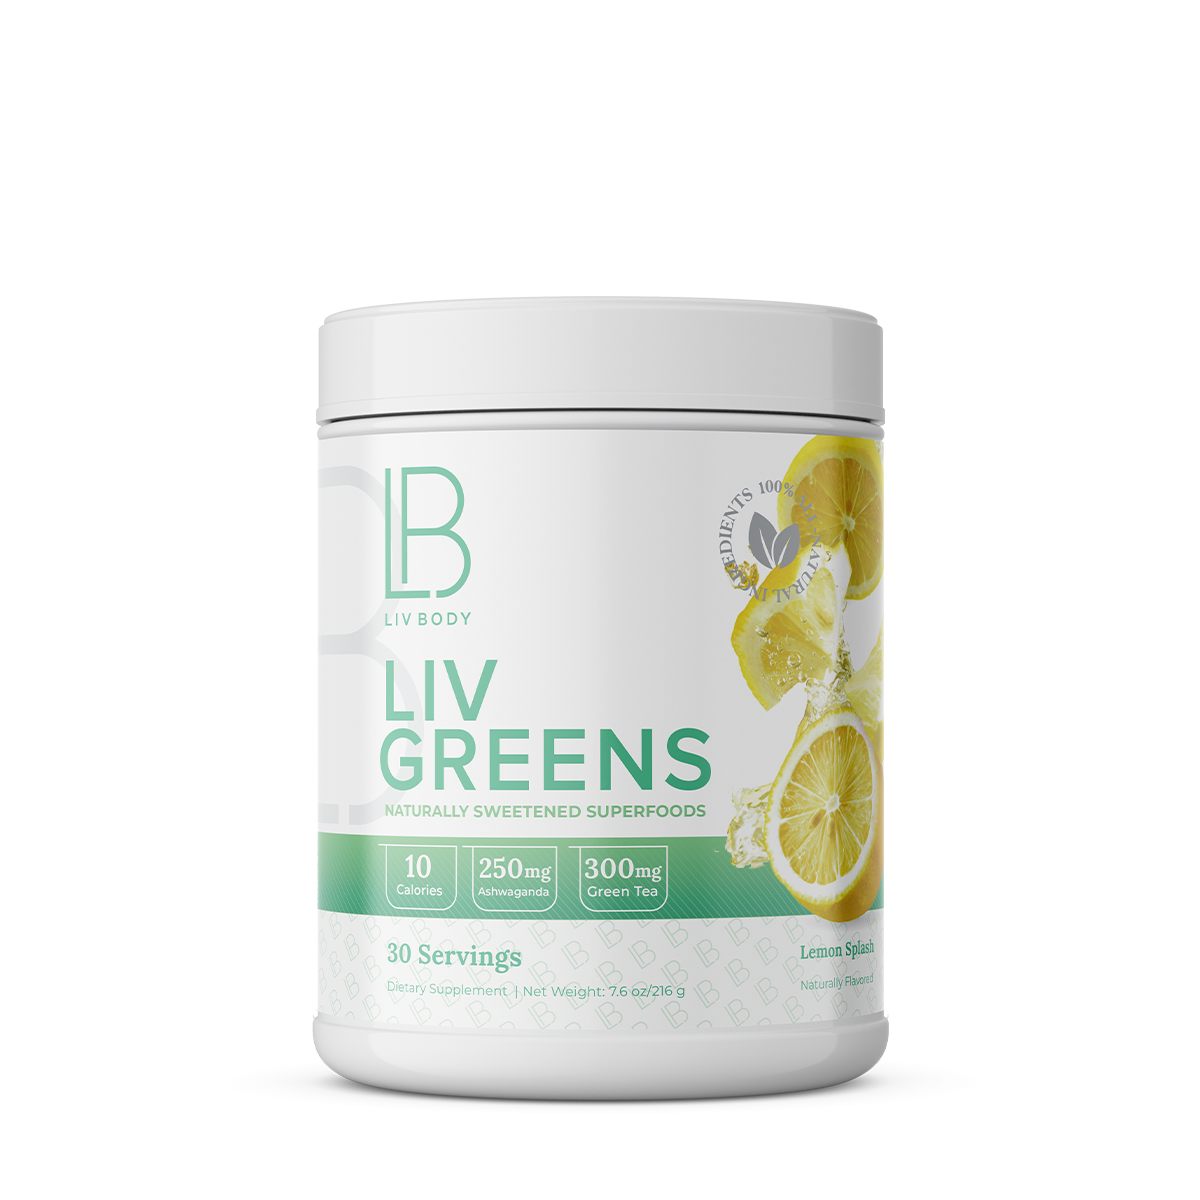 Image of LIV Greens - Superfoods, supercharging the body's natural detox system.